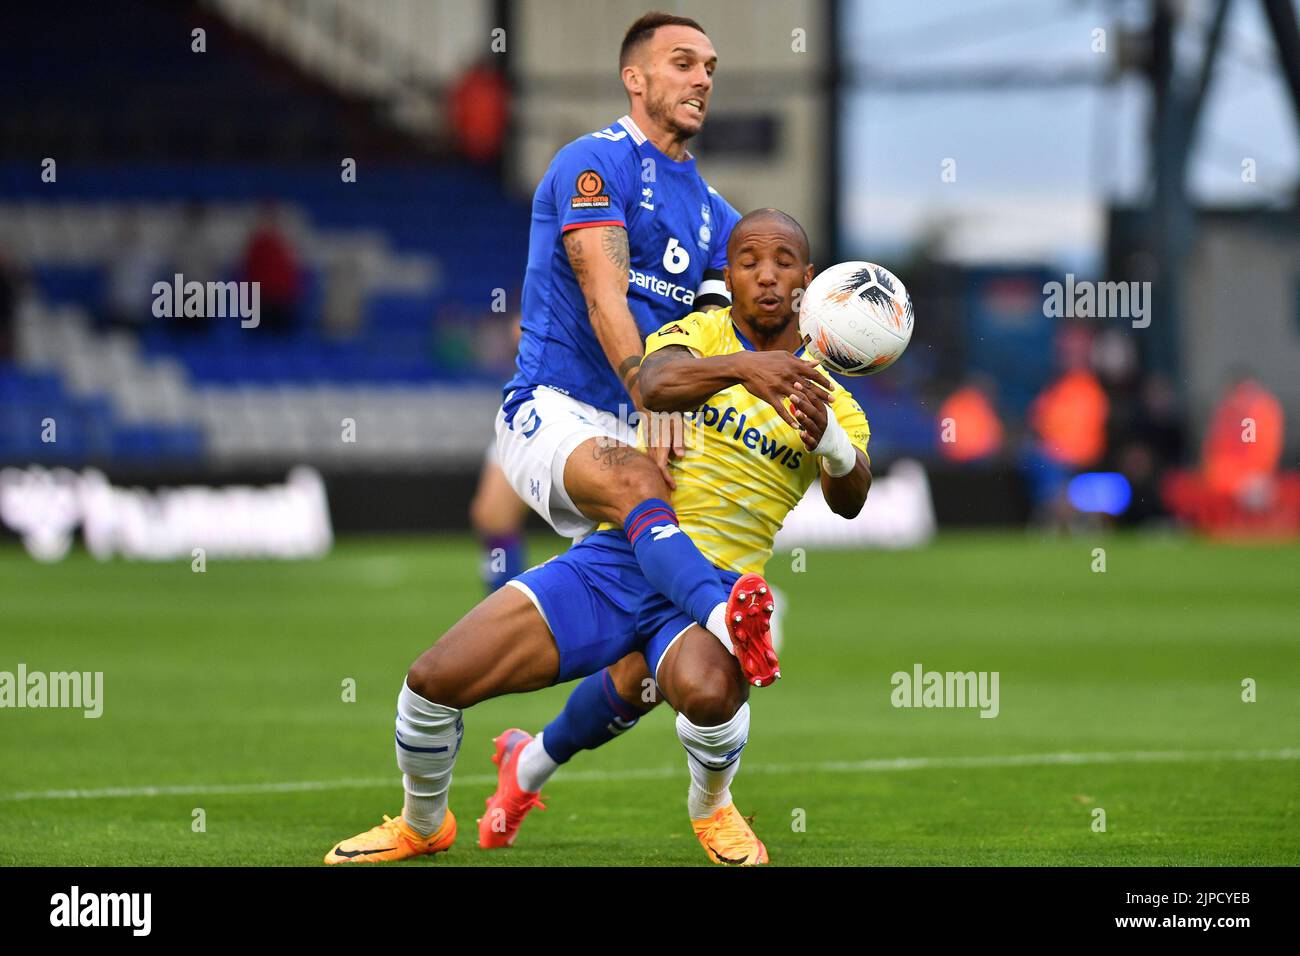 Liam Hogan (Captain) of Oldham Athletic tussles with Rhys Browne of Wealdstone Football Club during the Vanarama National League match between Oldham Athletic and Wealdstone at Boundary Park, Oldham on Wednesday 17th August 2022. (Credit: Eddie Garvey | MI News) Credit: MI News & Sport /Alamy Live News Stock Photo